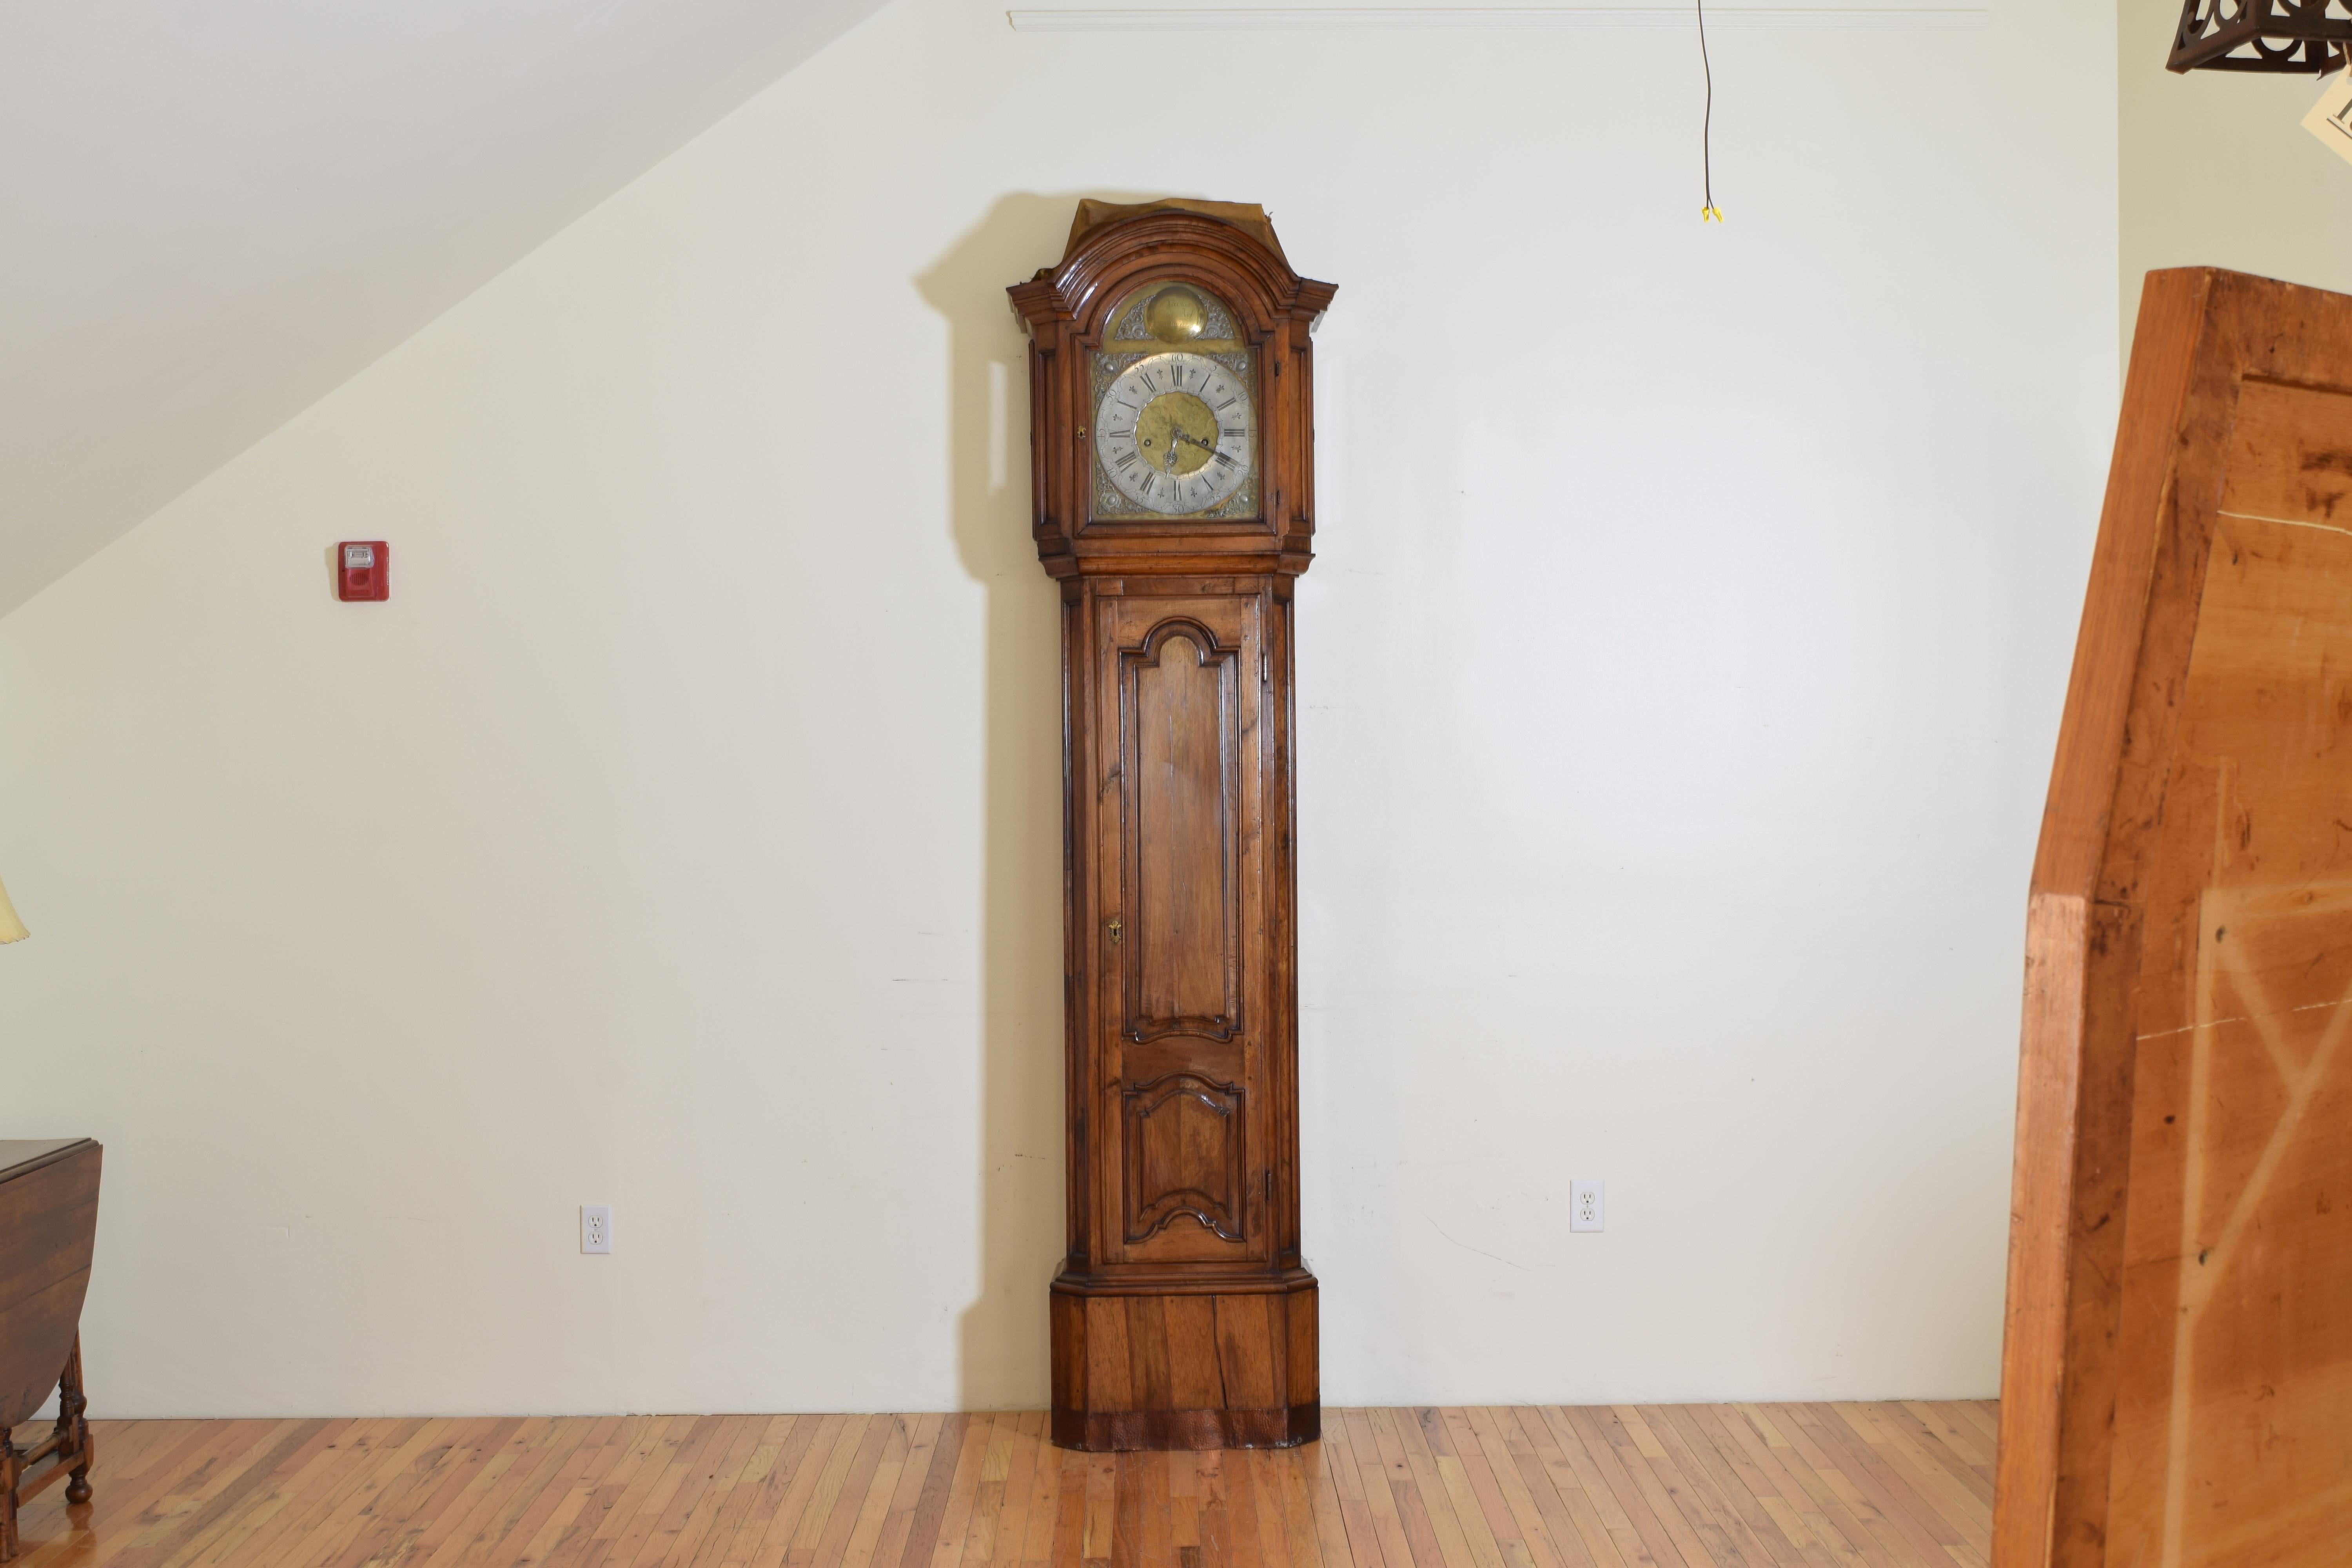 Appearing to have the original clockworks made by Nicolas De Beefe A Malines, recently serviced, this massive case is constructed entirely of walnut and represents a transition in styles of the second quarter of the mid-18th century, the works has a